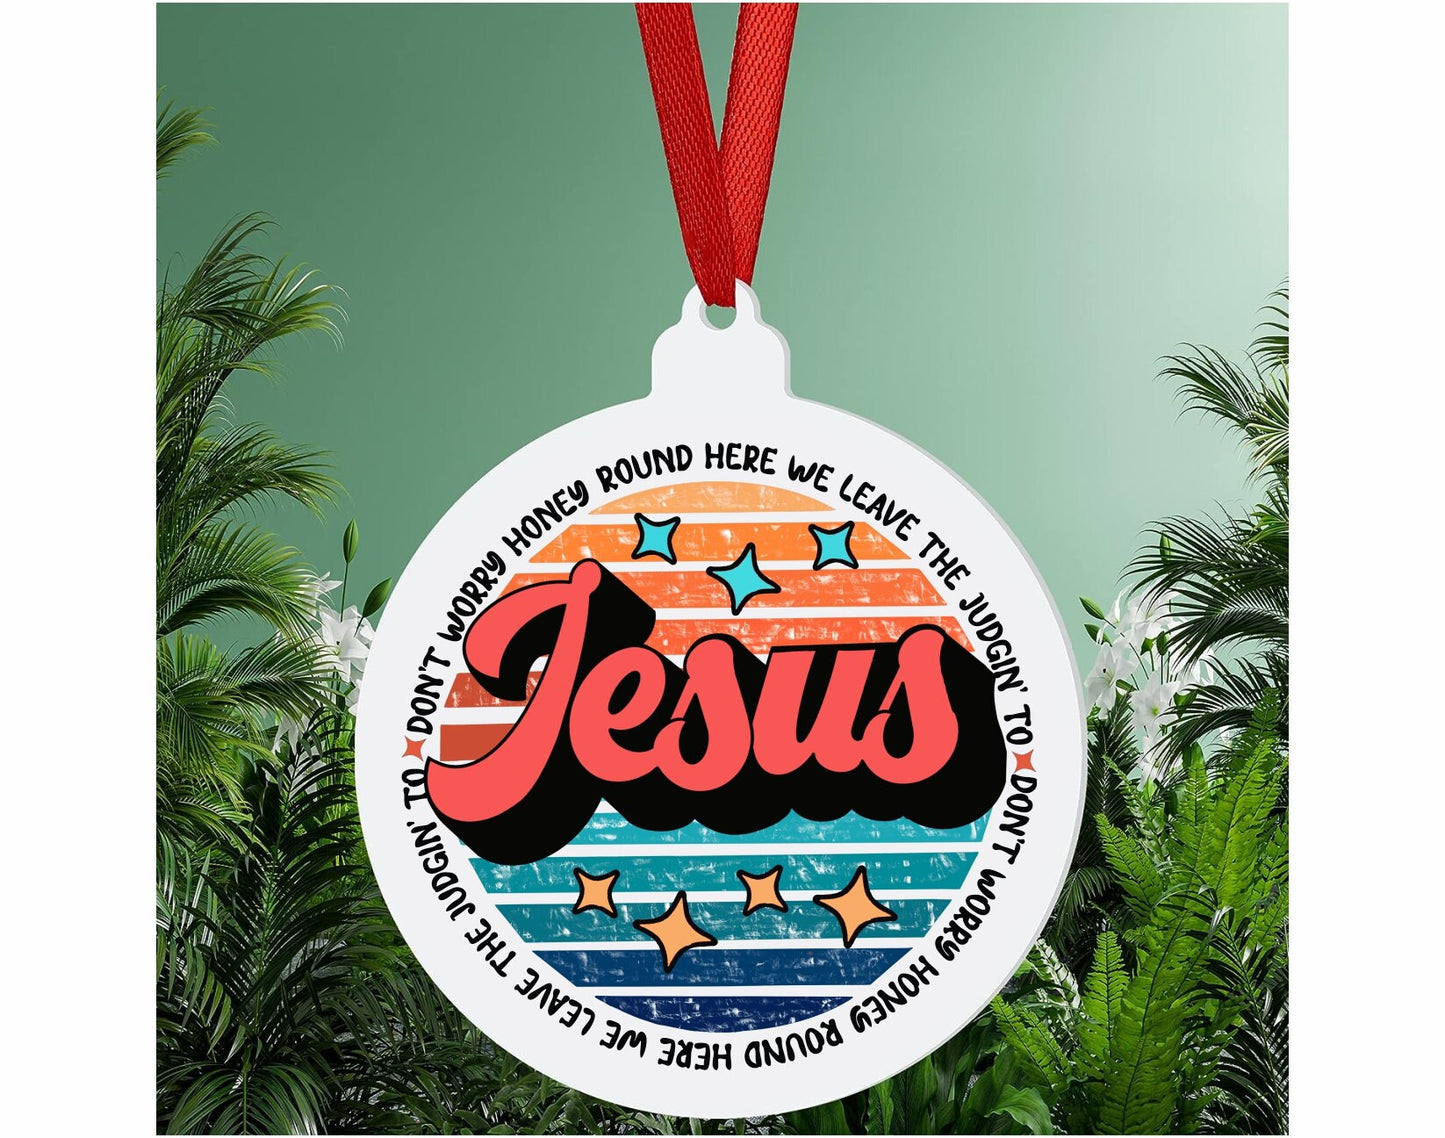 Christian Quotes Christmas Ornament